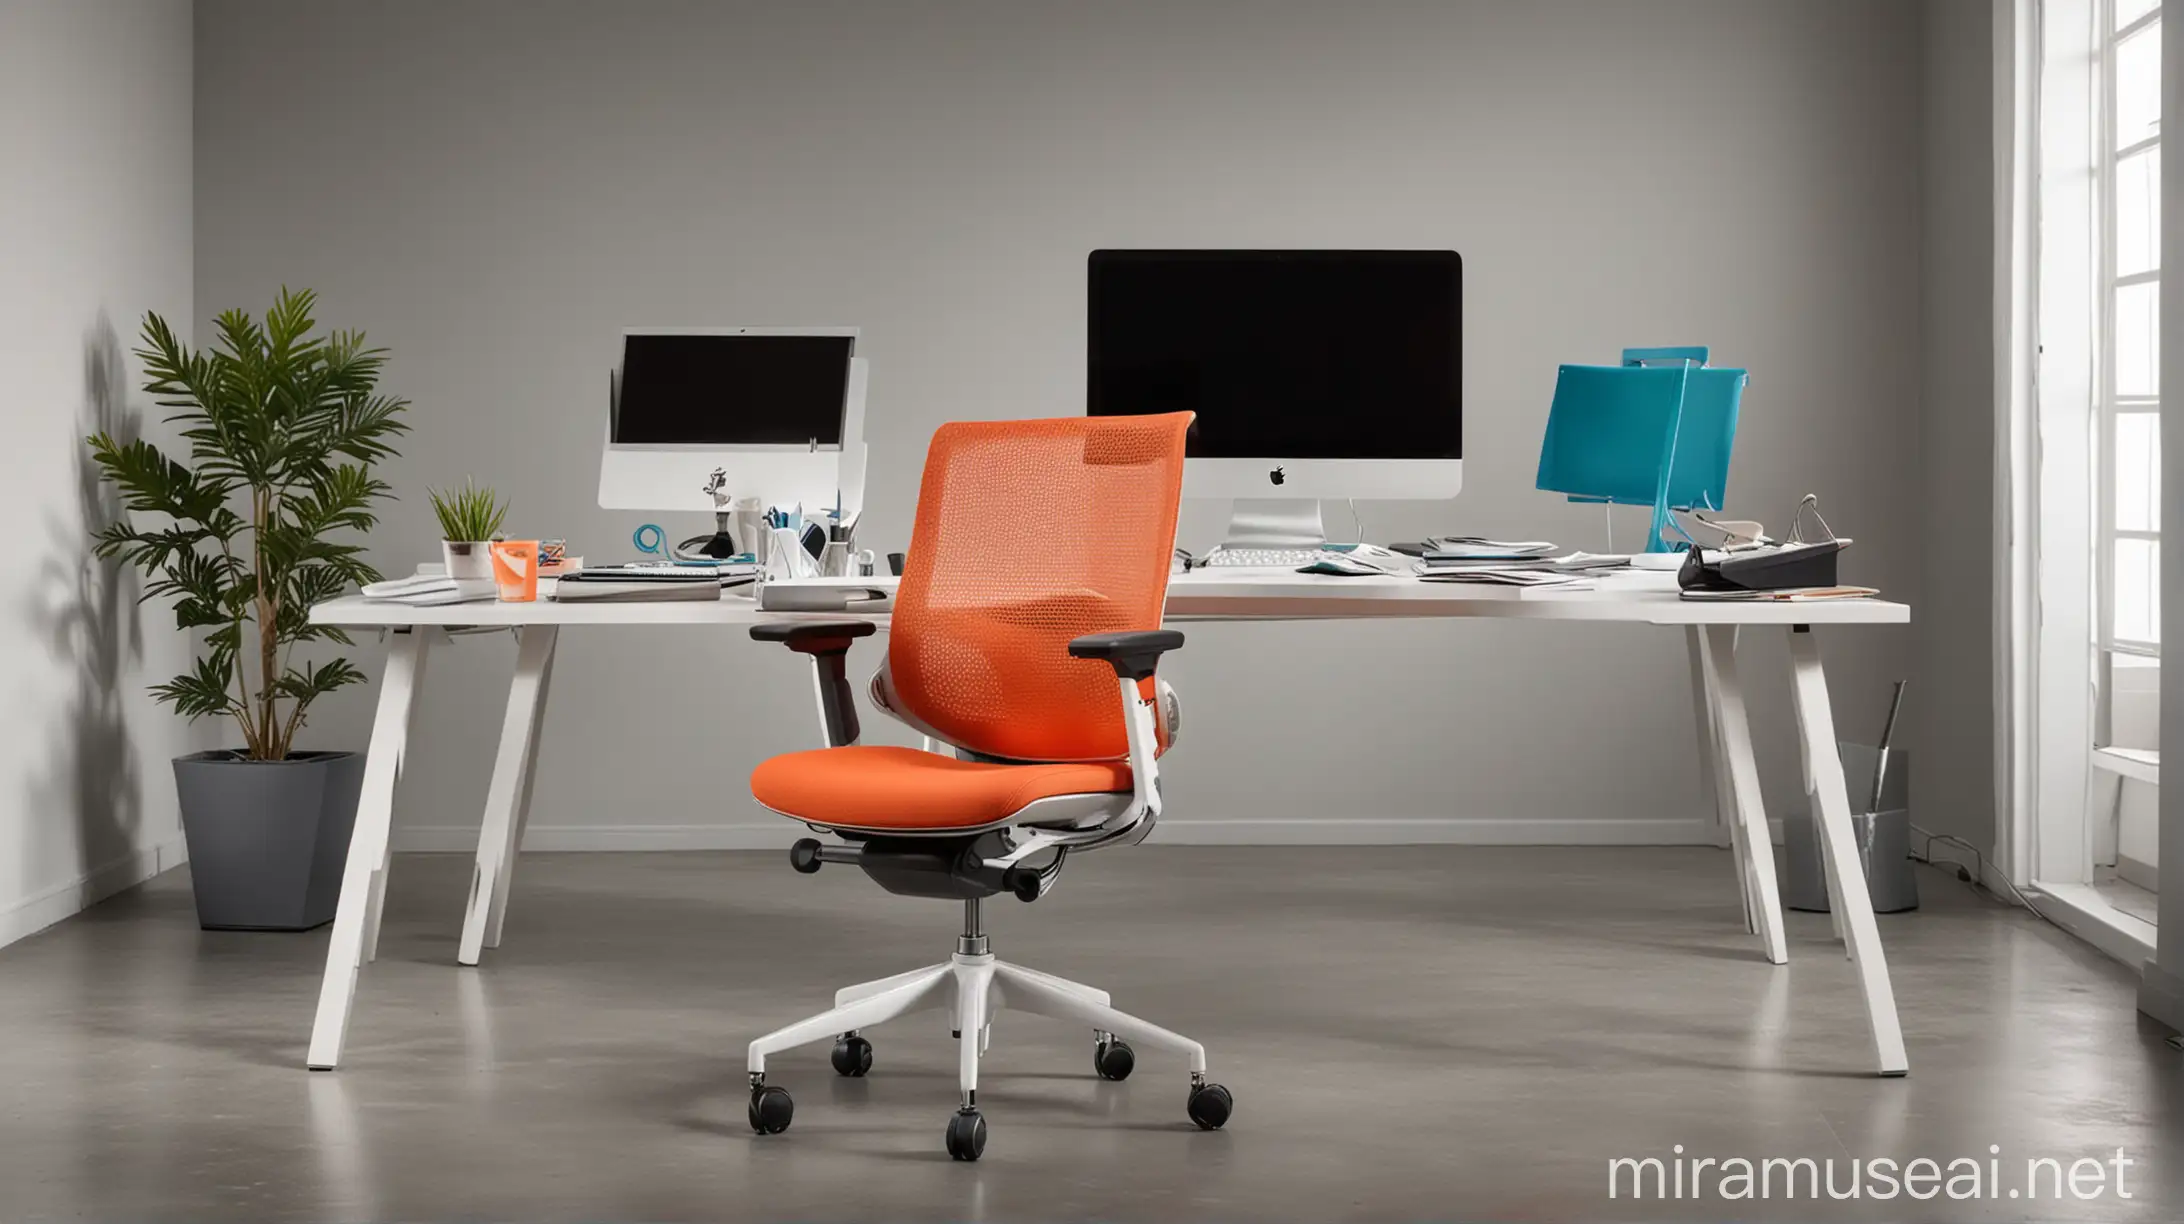 Modern Office Scene with Relaxed and Colorful Ergonomic Chair